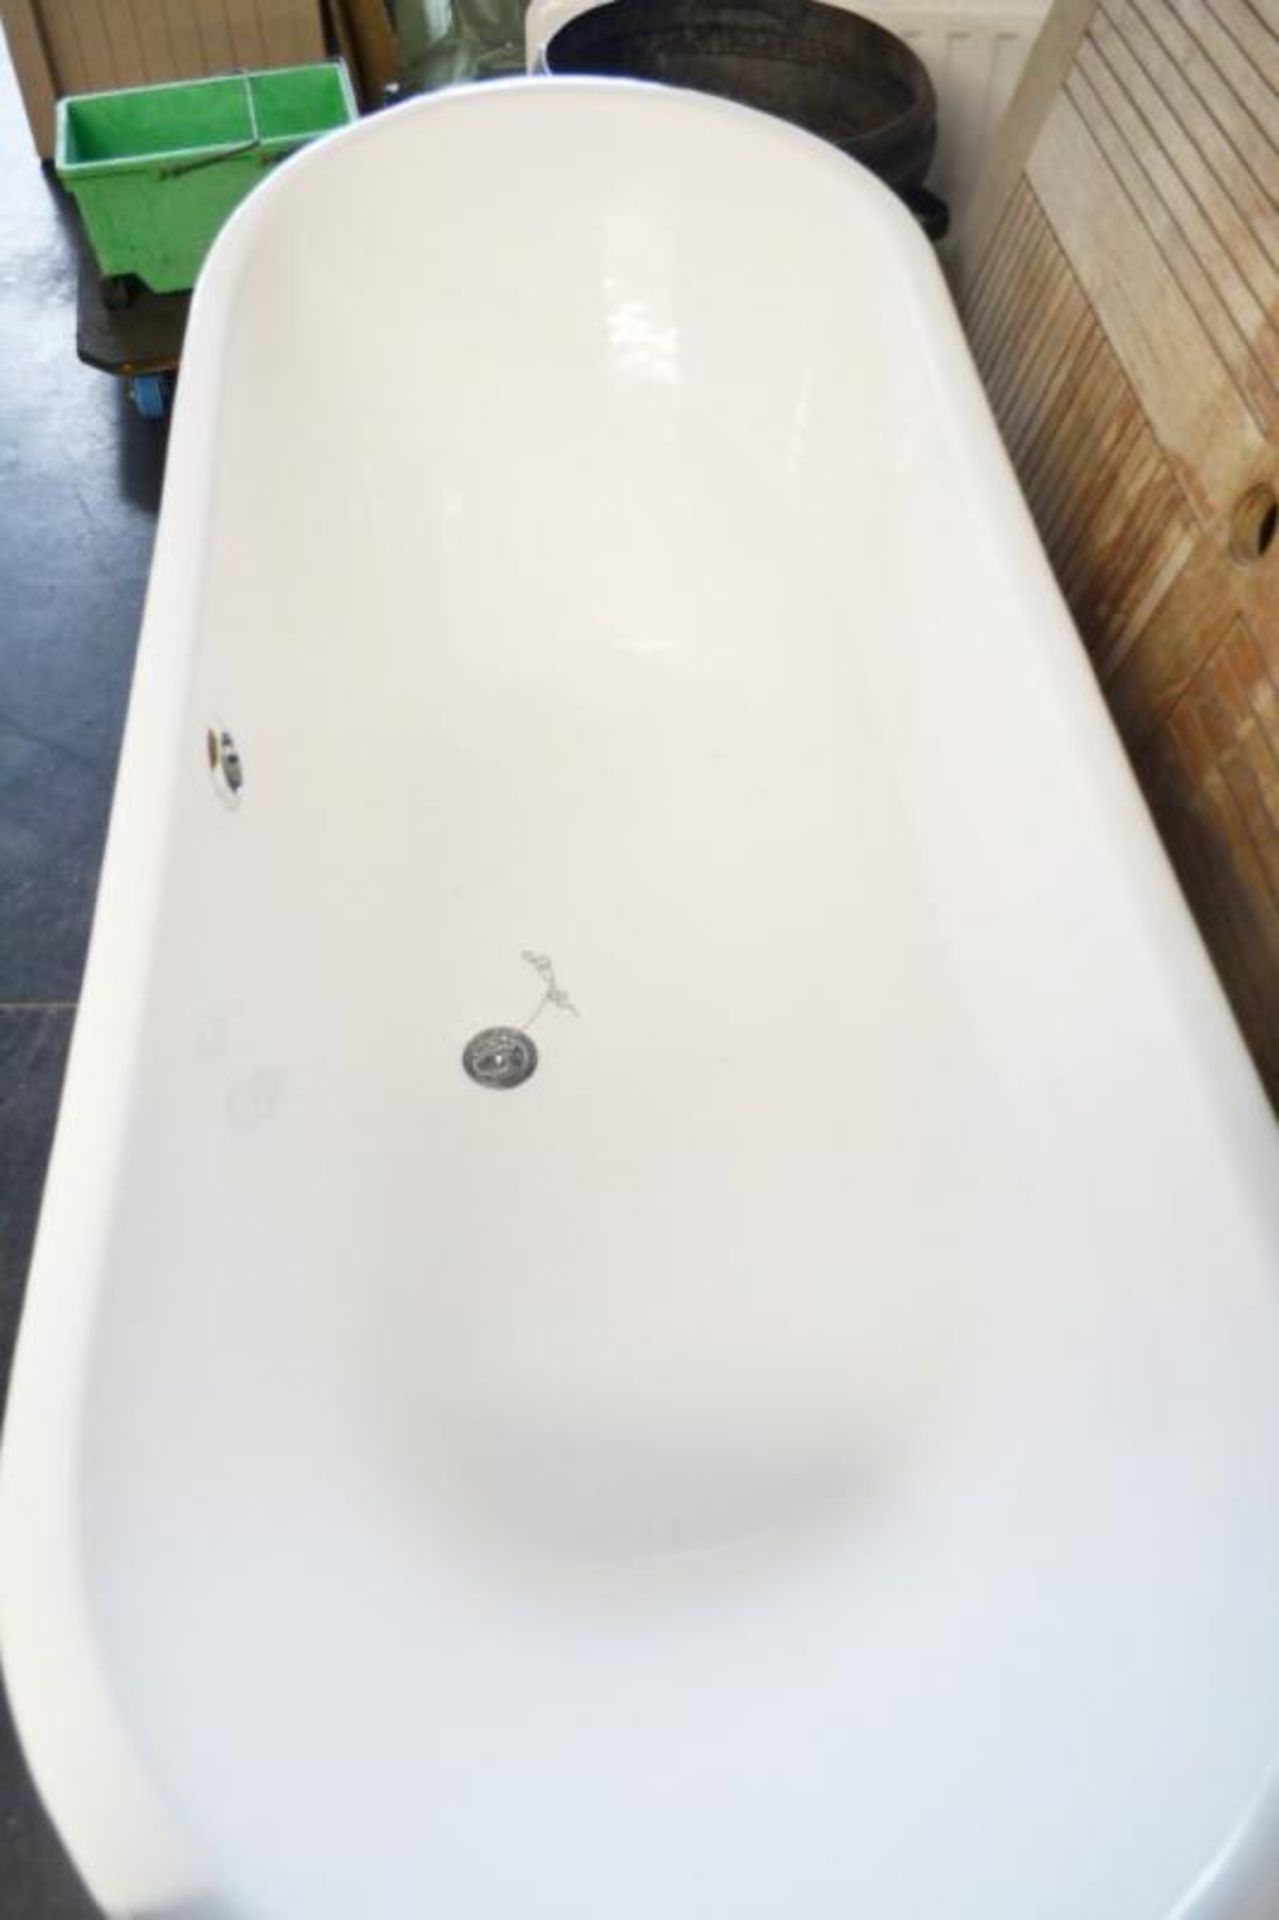 1 x Cast Iron Bath With Stainless Steel Exterior - CL439 - Location: Ilkey LS29 - Used In Good Condi - Image 2 of 8